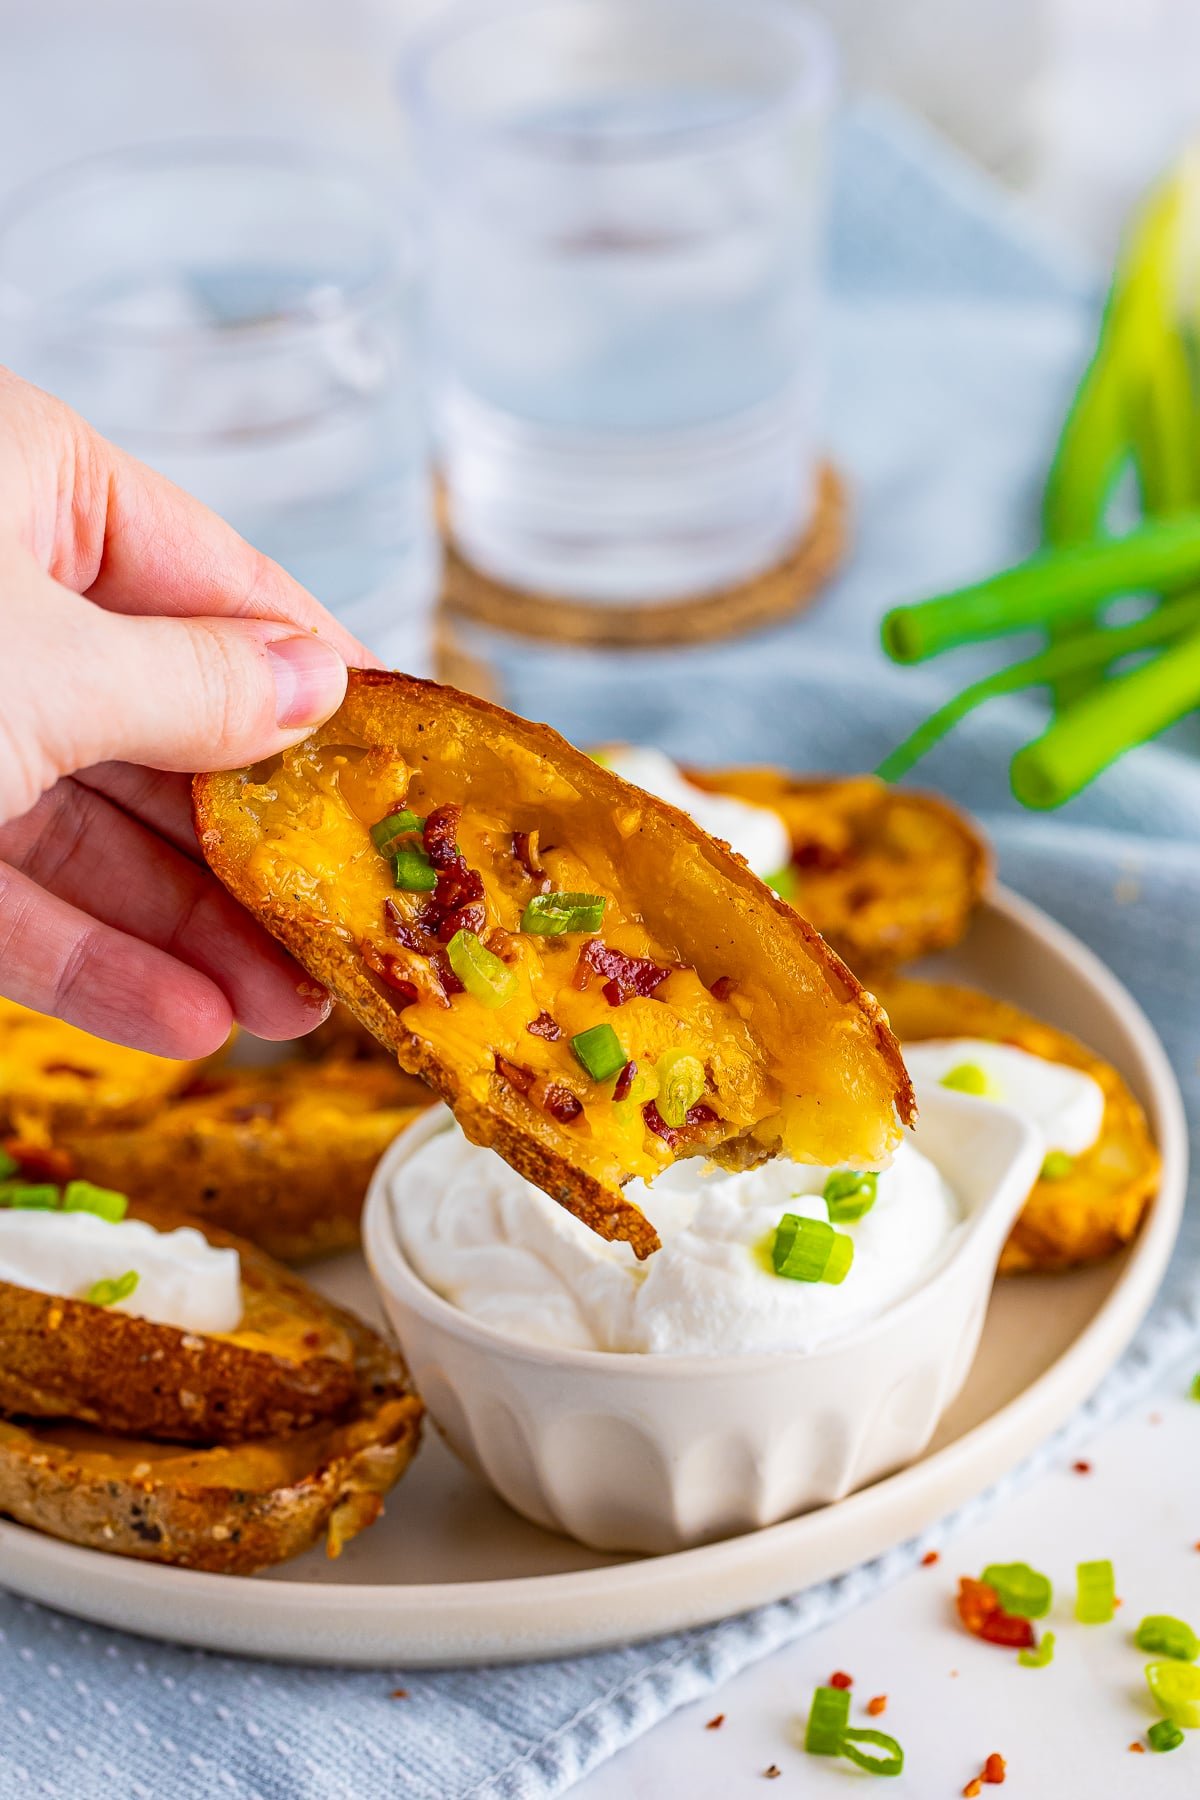 Hand dipping one of the Loaded Potato Skins into sour cream.